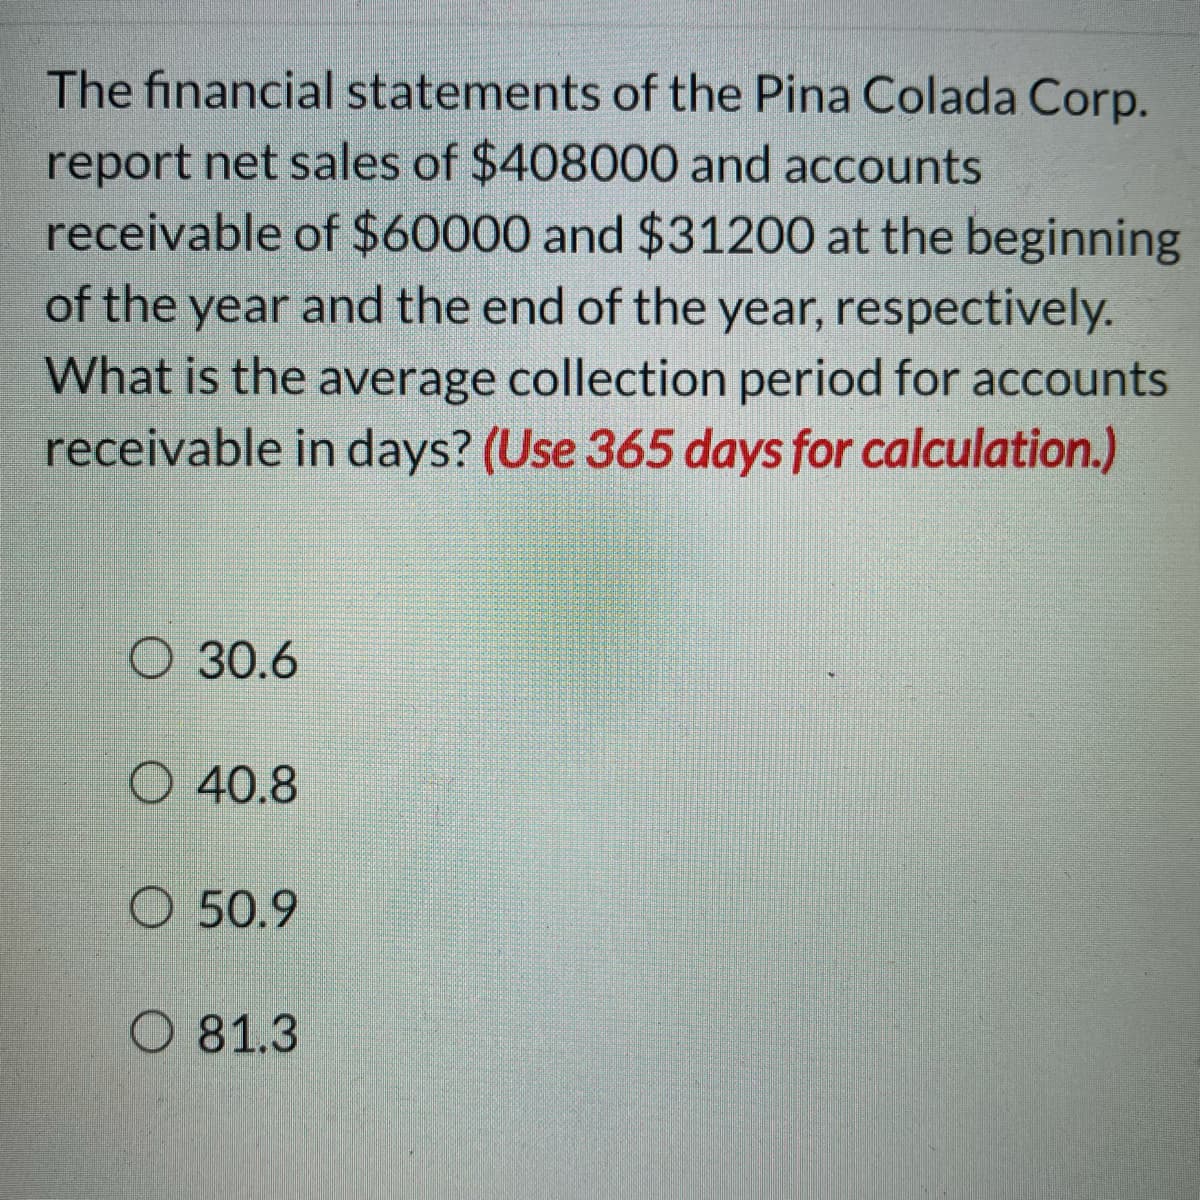 The financial statements of the Pina Colada Corp.
report net sales of $408000 and accounts
receivable of $60000 and $31200 at the beginning
of the year and the end of the year, respectively.
What is the average collection period for accounts
receivable in days? (Use 365 days for calculation.)
O 30.6
O 40.8
O 50.9
O 81.3
